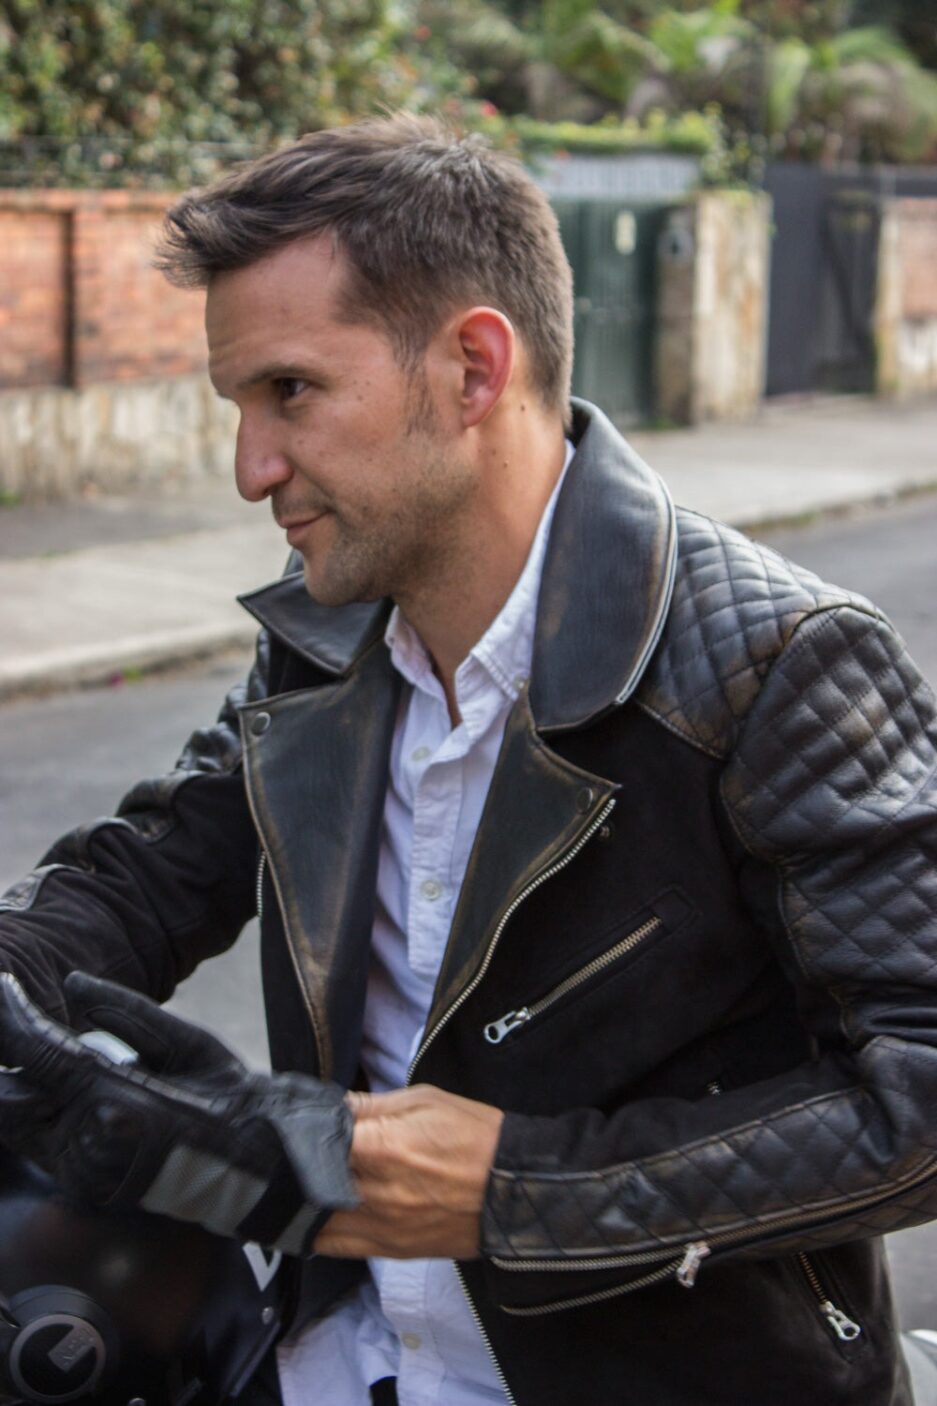 Men's Distressed Quilted Sleeves & Sued Leather Jacket